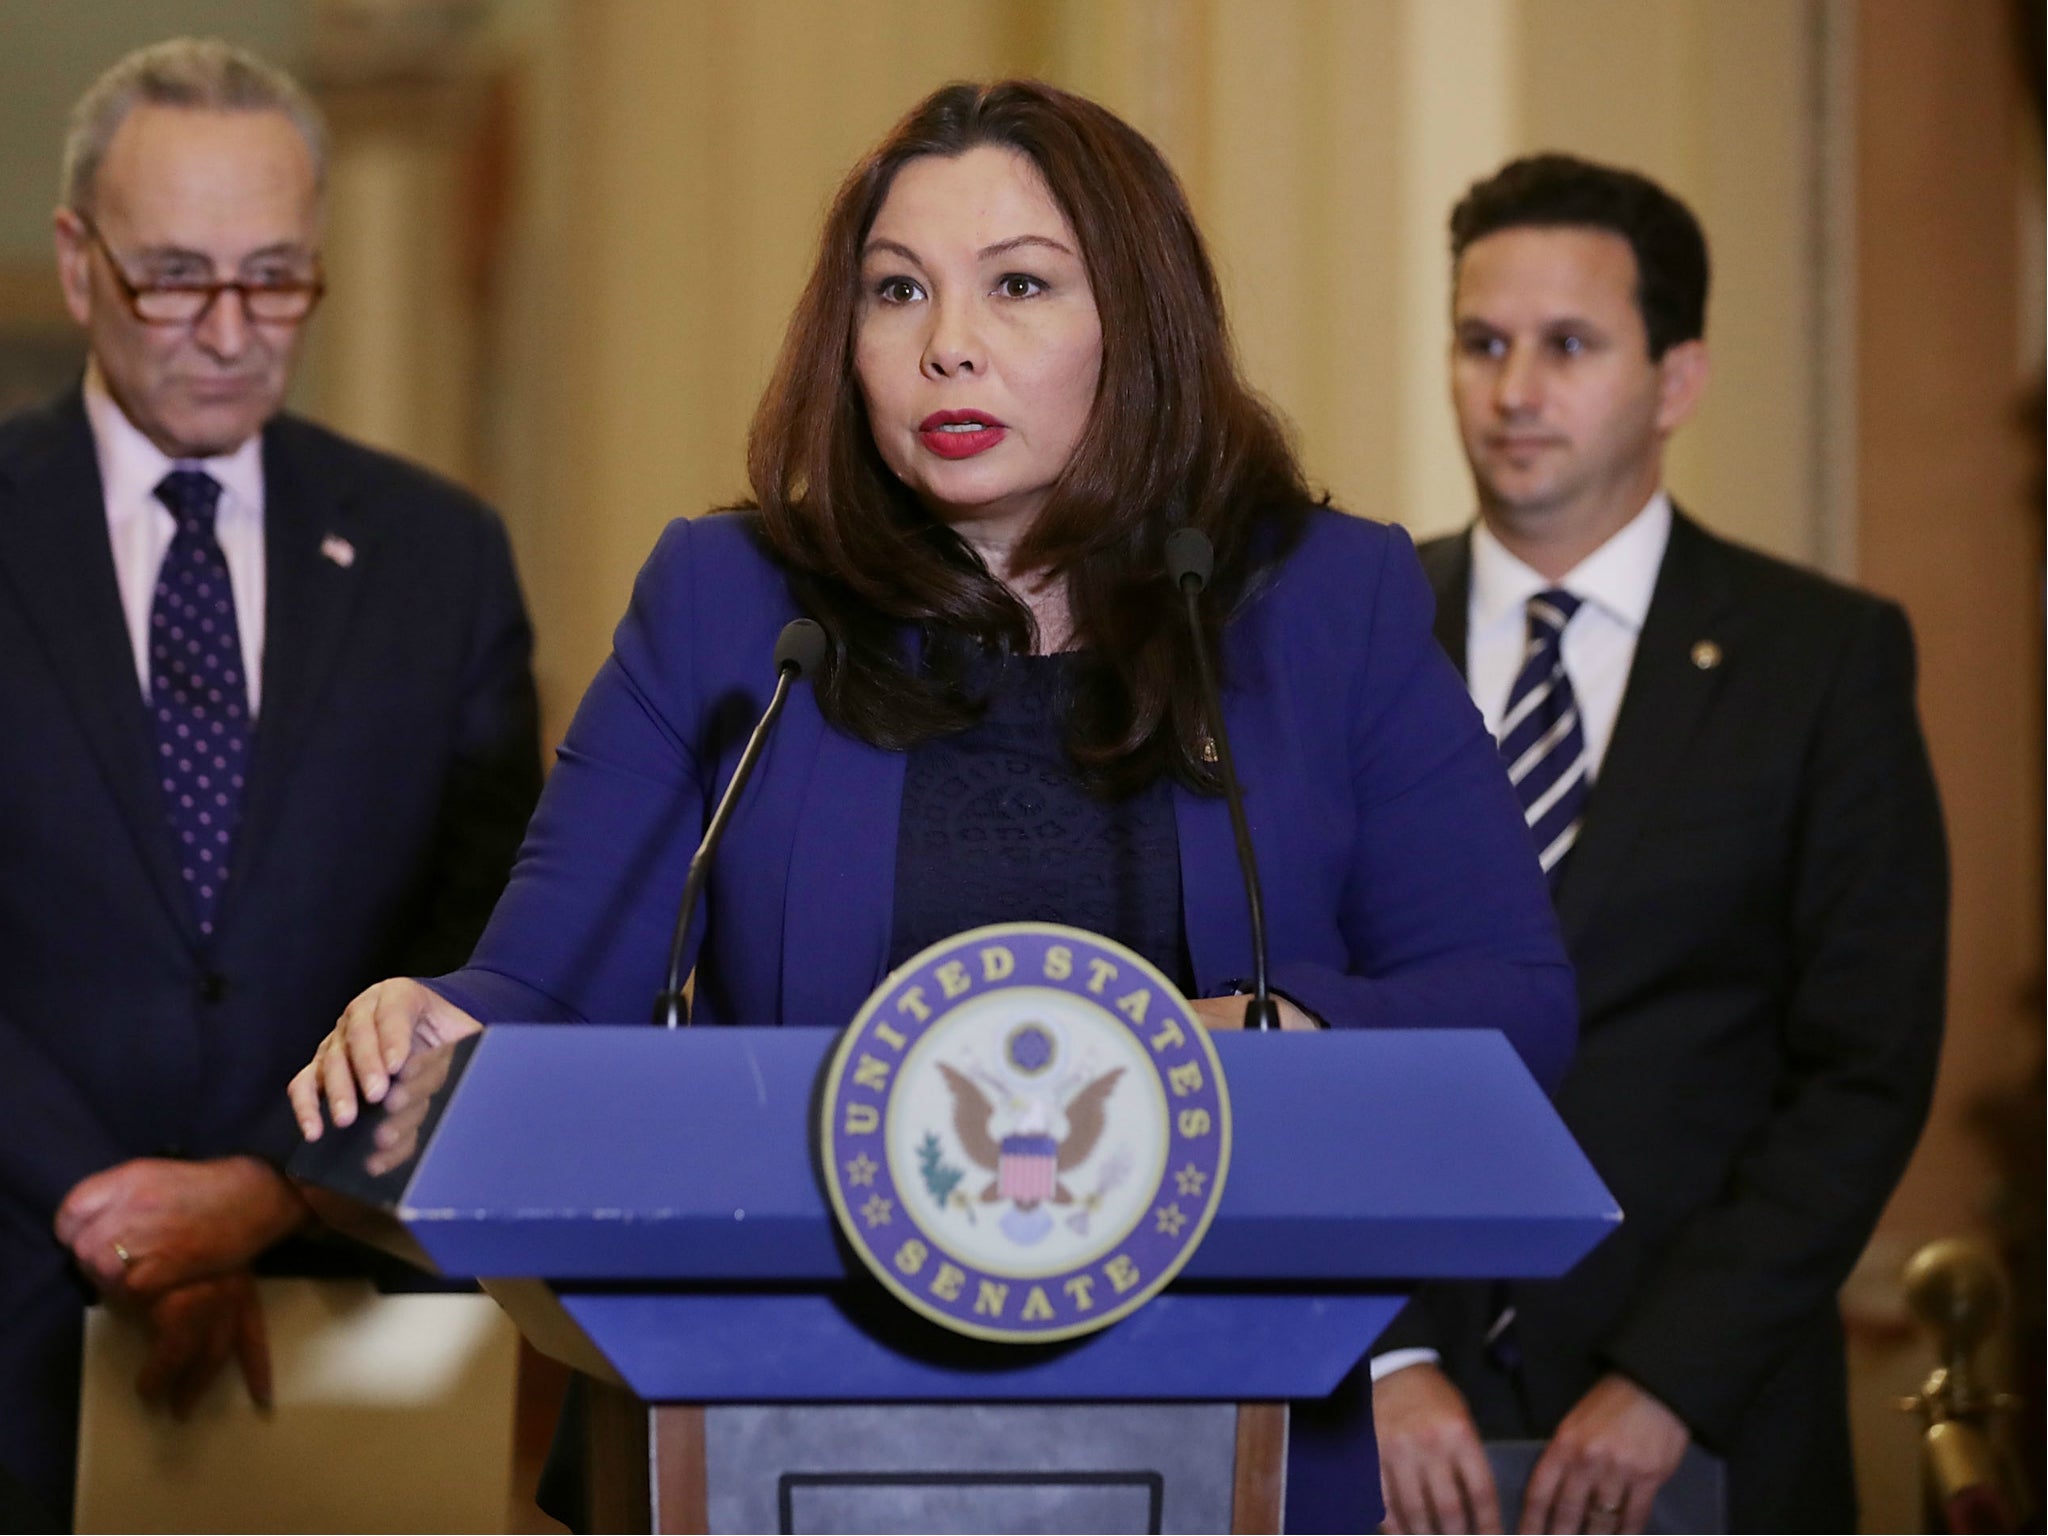 Tammy Duckworth lost both legs while serving in Iraq